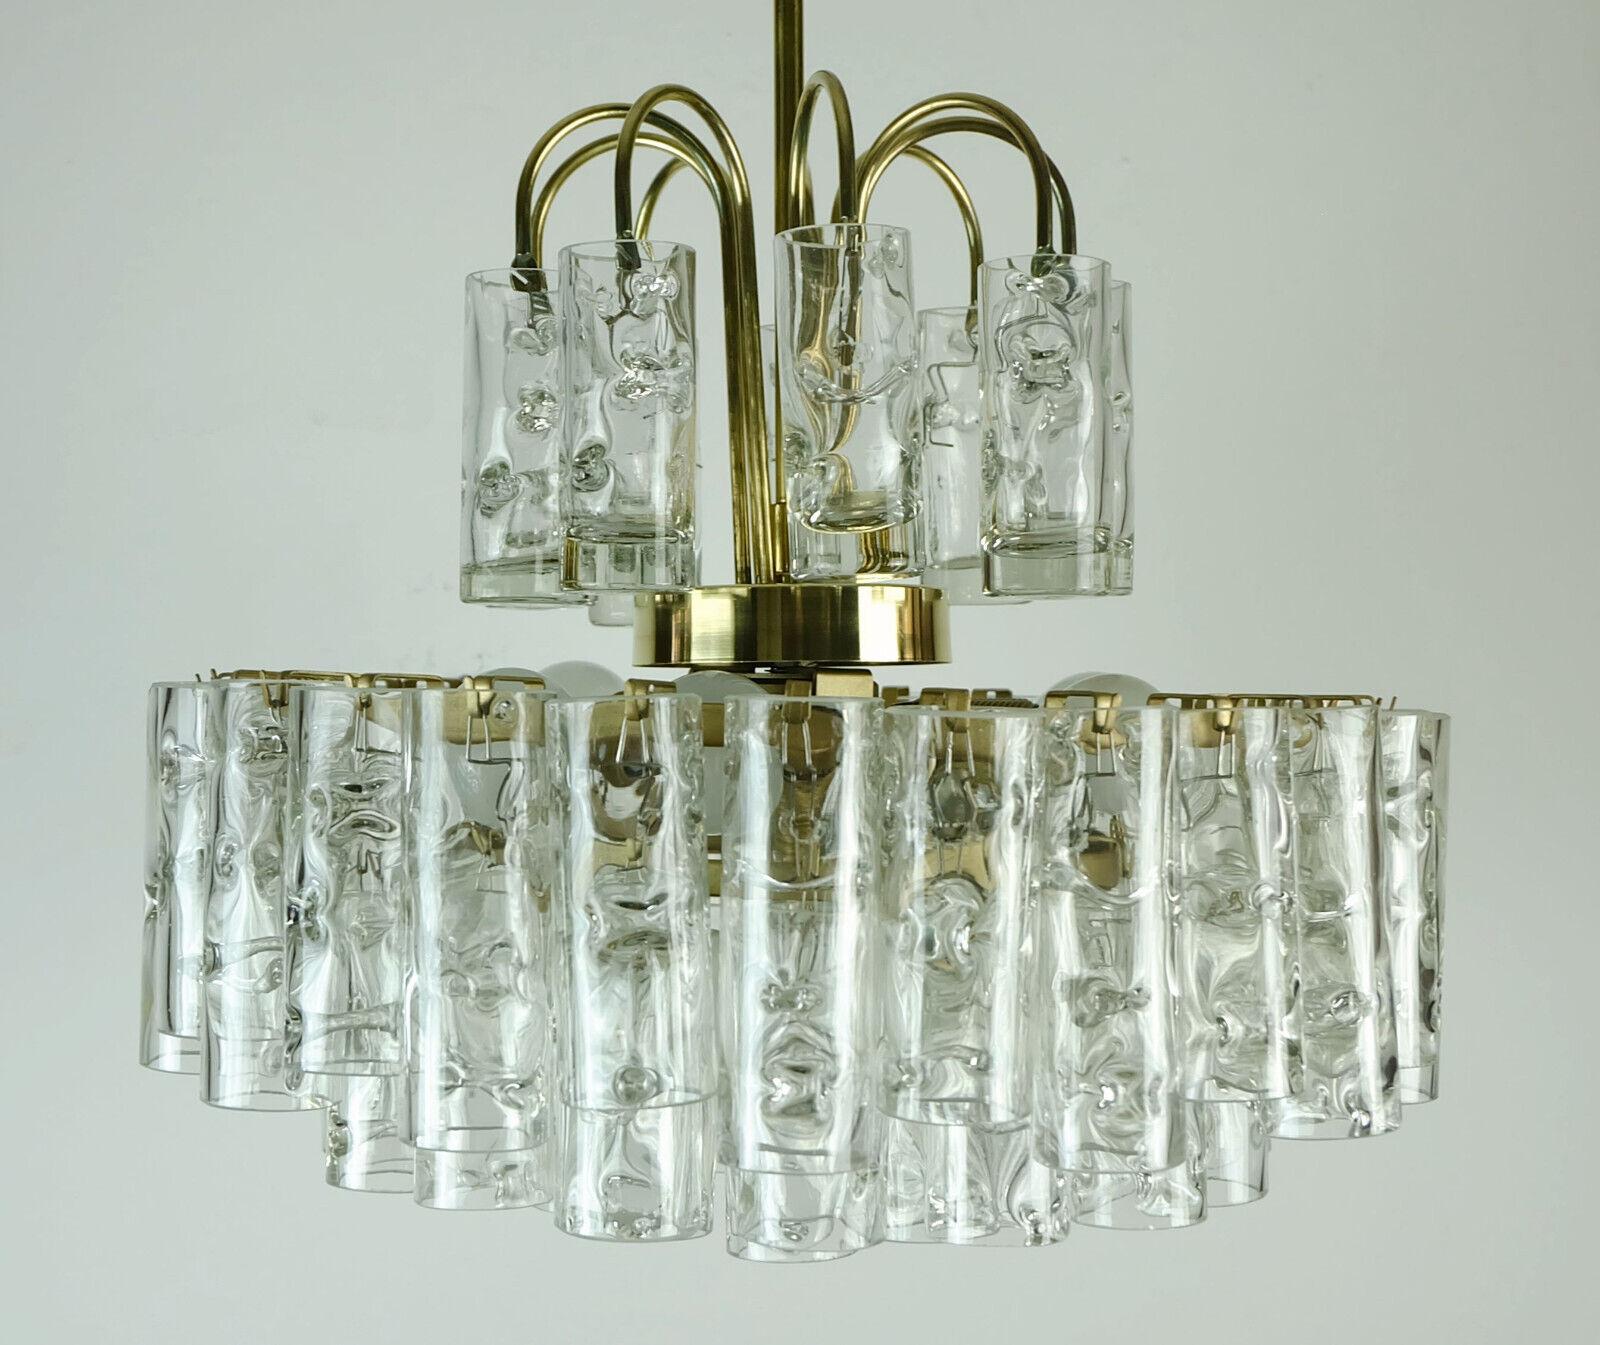 Beautiful chandelier manufactured by Doria Leuchten (Doria-Werk Walter Donner GmbH & Co. KG, Fürth) in the 1960s. The frame is made of matt gold painted metal. 53 tubes made of structured glass hang from it, arranged in three tiers, above which